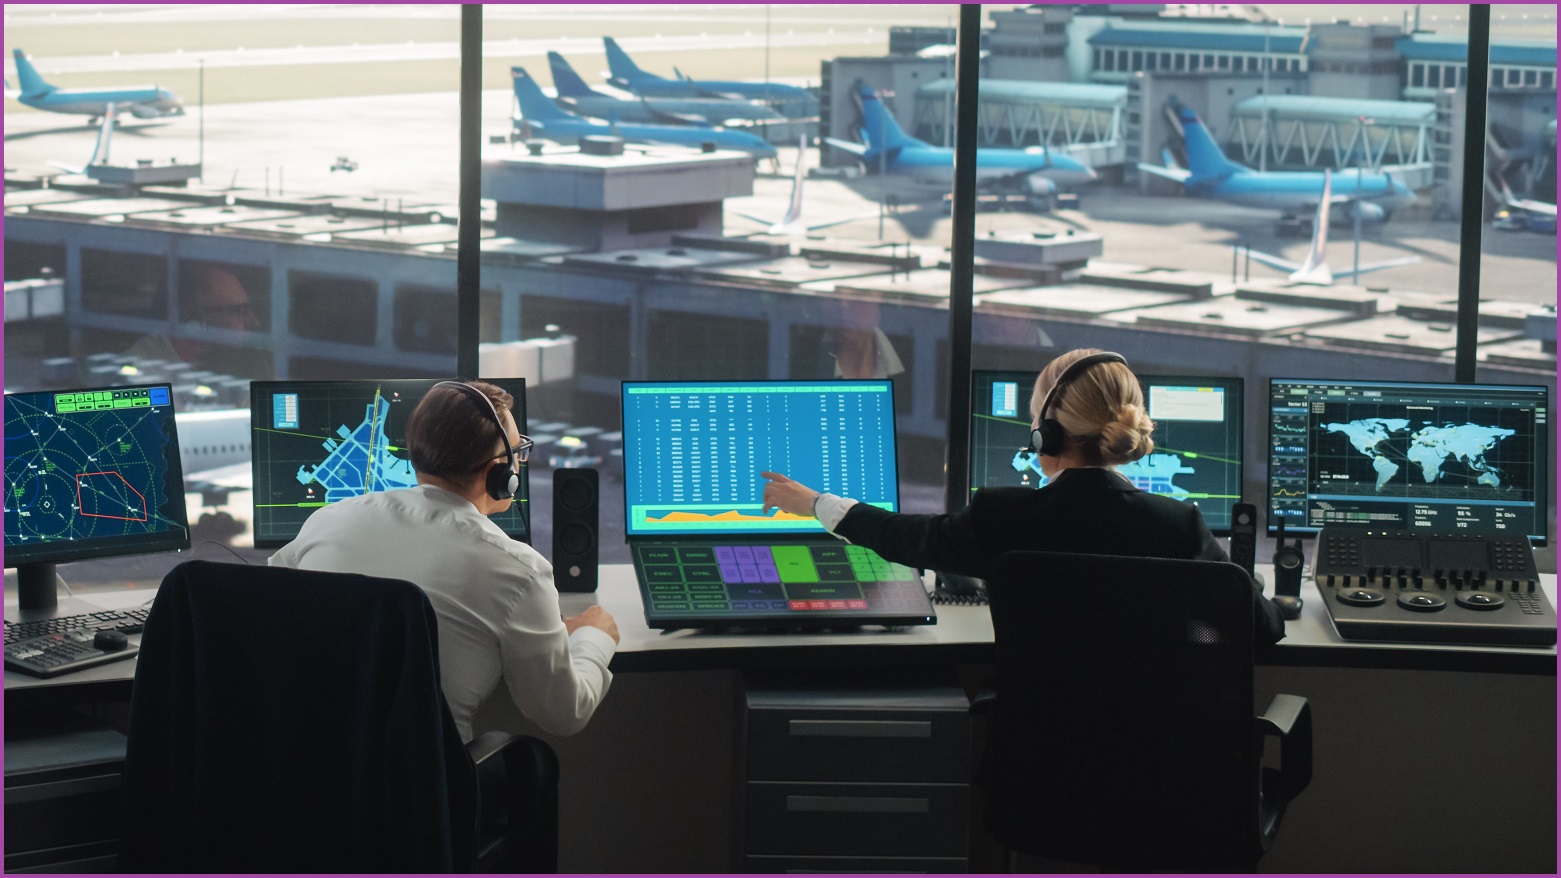 Two people inside a control tower at an airport.